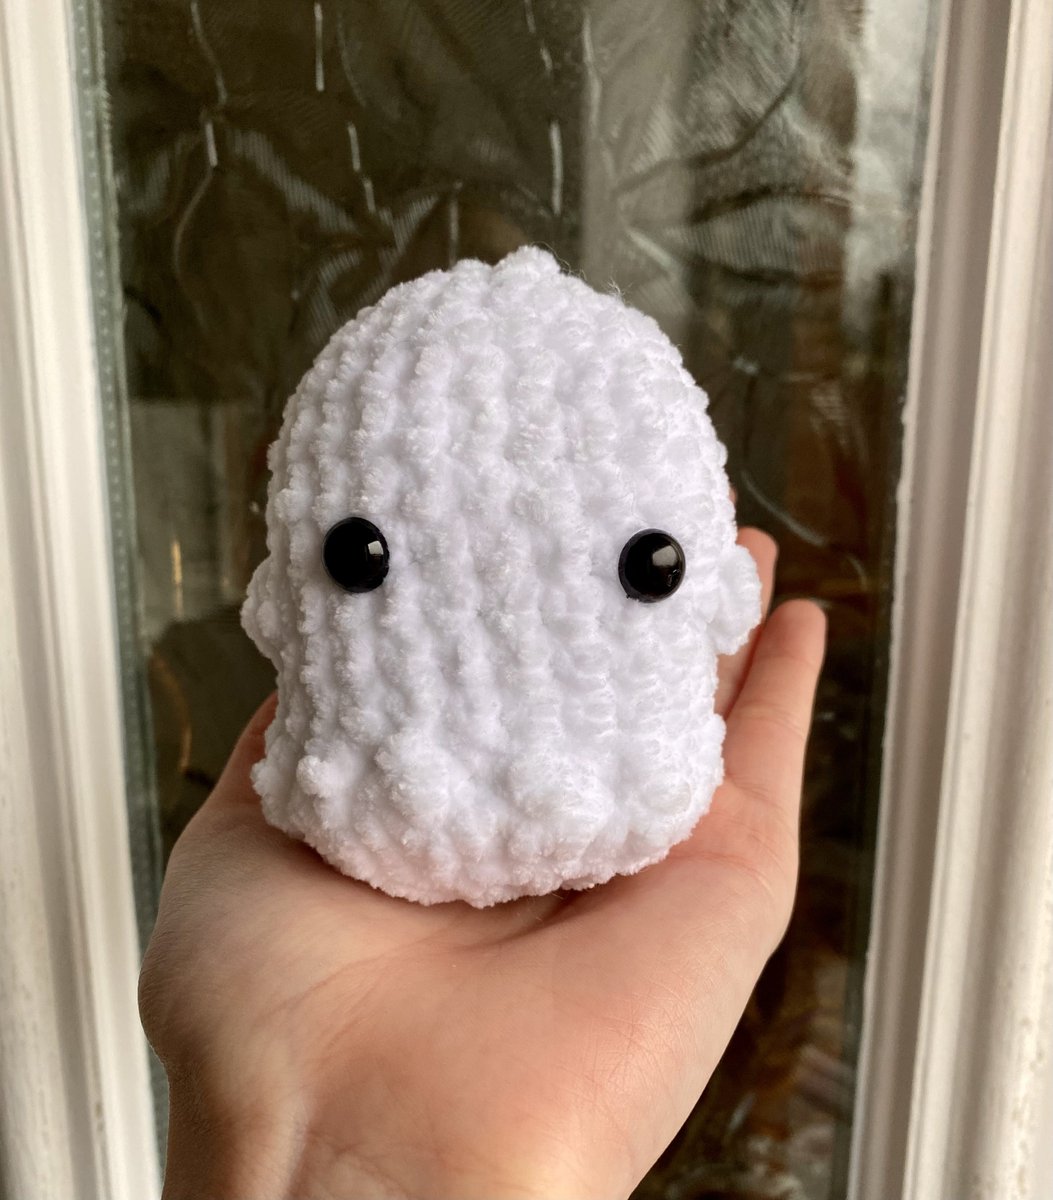 Excited to share the latest addition to my #etsy shop: Ghost crochet plushie ghost plush etsy.me/3FvbaY7 #white #handmadegift #crochetplushie #crochetplush #crochetamigurumi #amigurumiplush #amigurumiplushie #plushamigurumi #plushieamigurumi